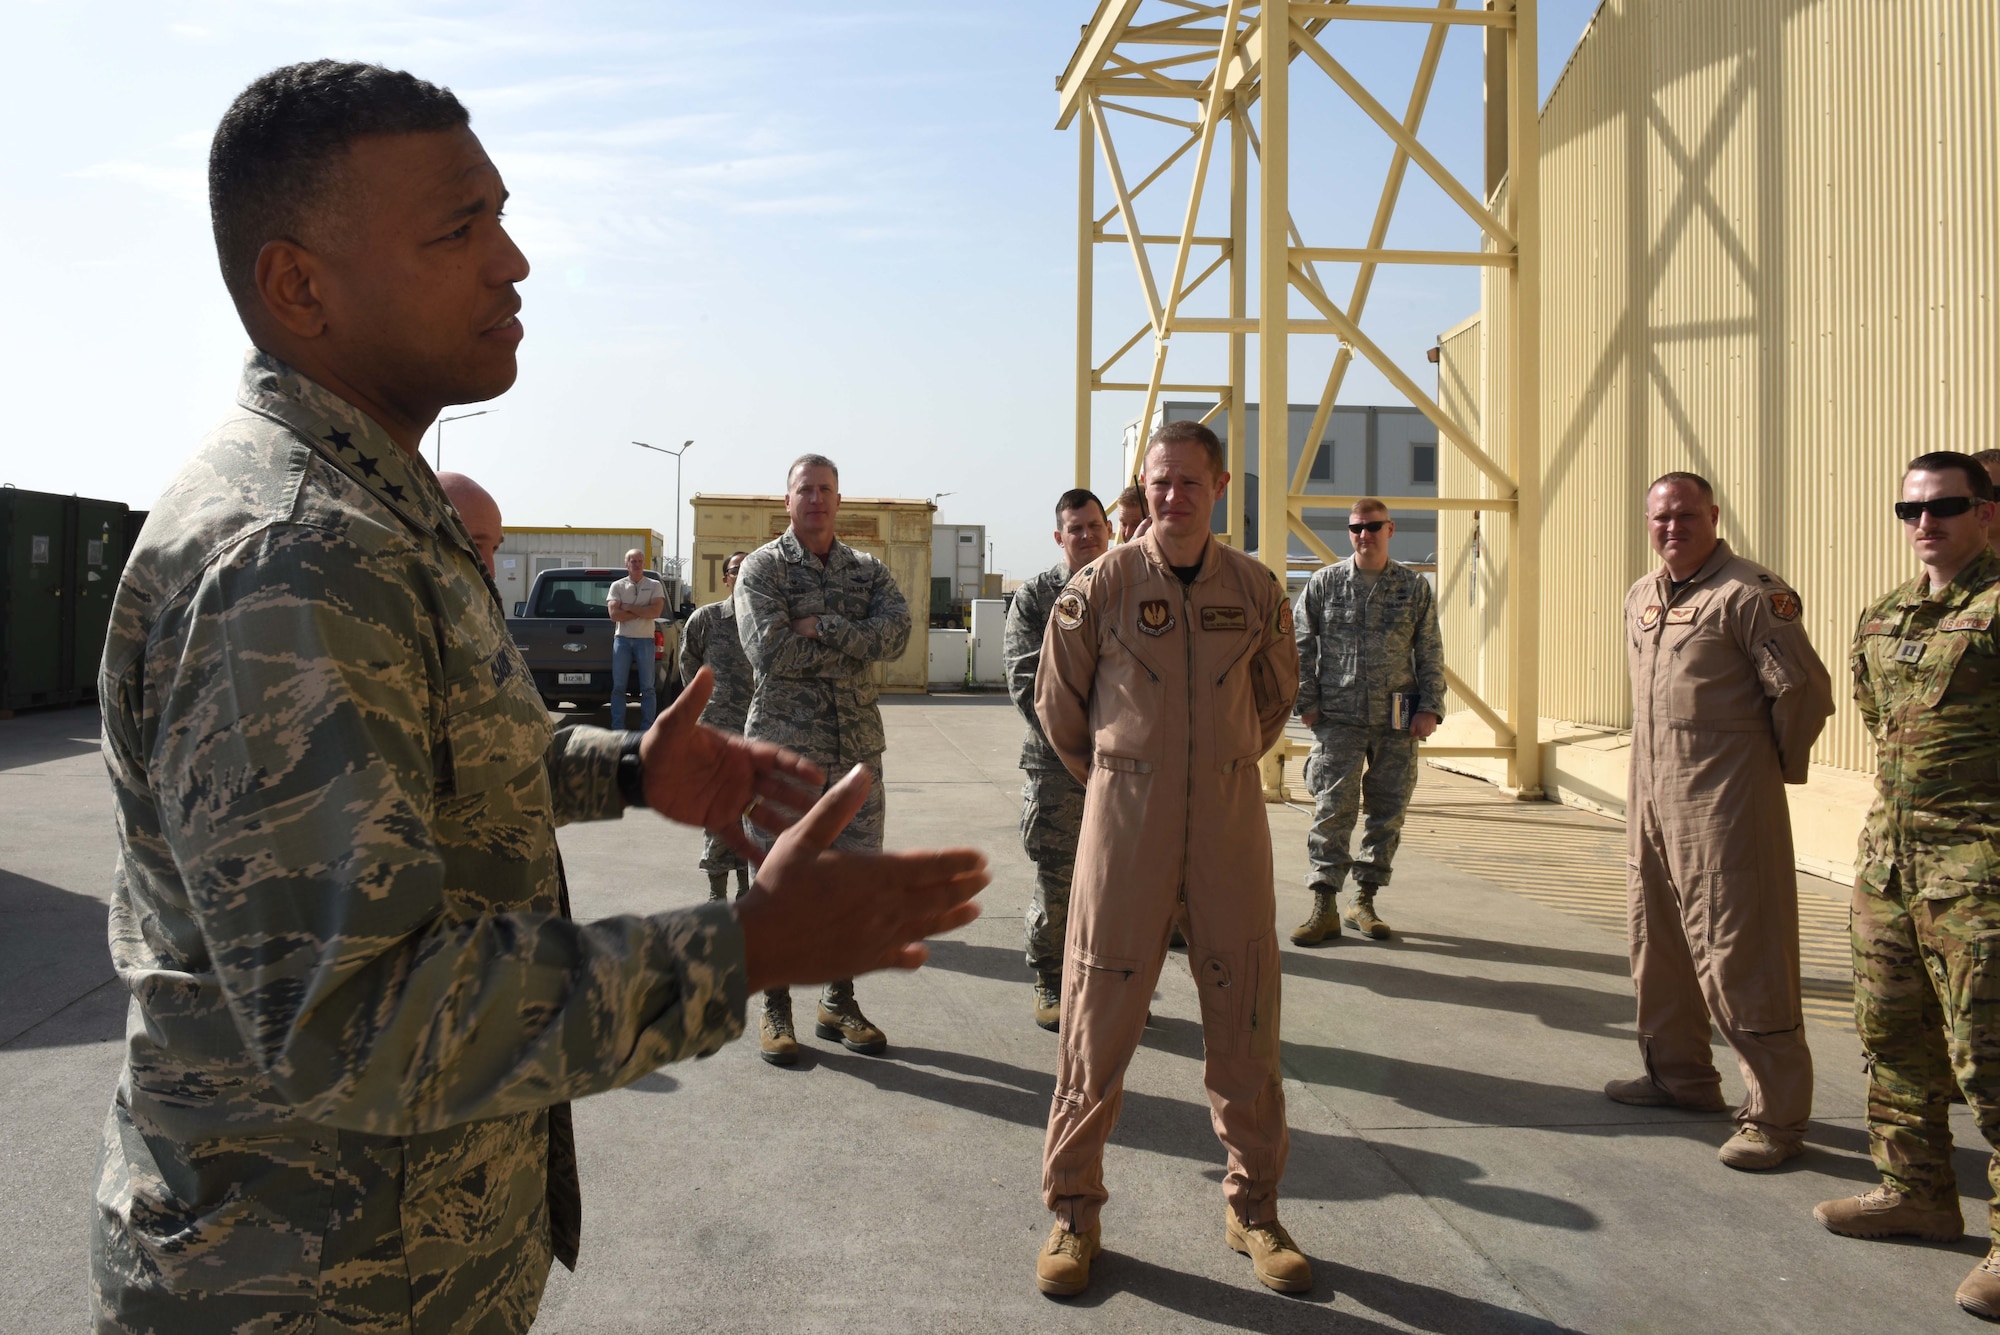 U.S. Air Force Lt. Gen. Richard M. Clark, 3rd Air Force commander, speaks to Airmen assigned to the 414th Expeditionary Reconnaissance Squadron during his visit at Incirlik Air Base, Turkey, Feb. 9, 2018.